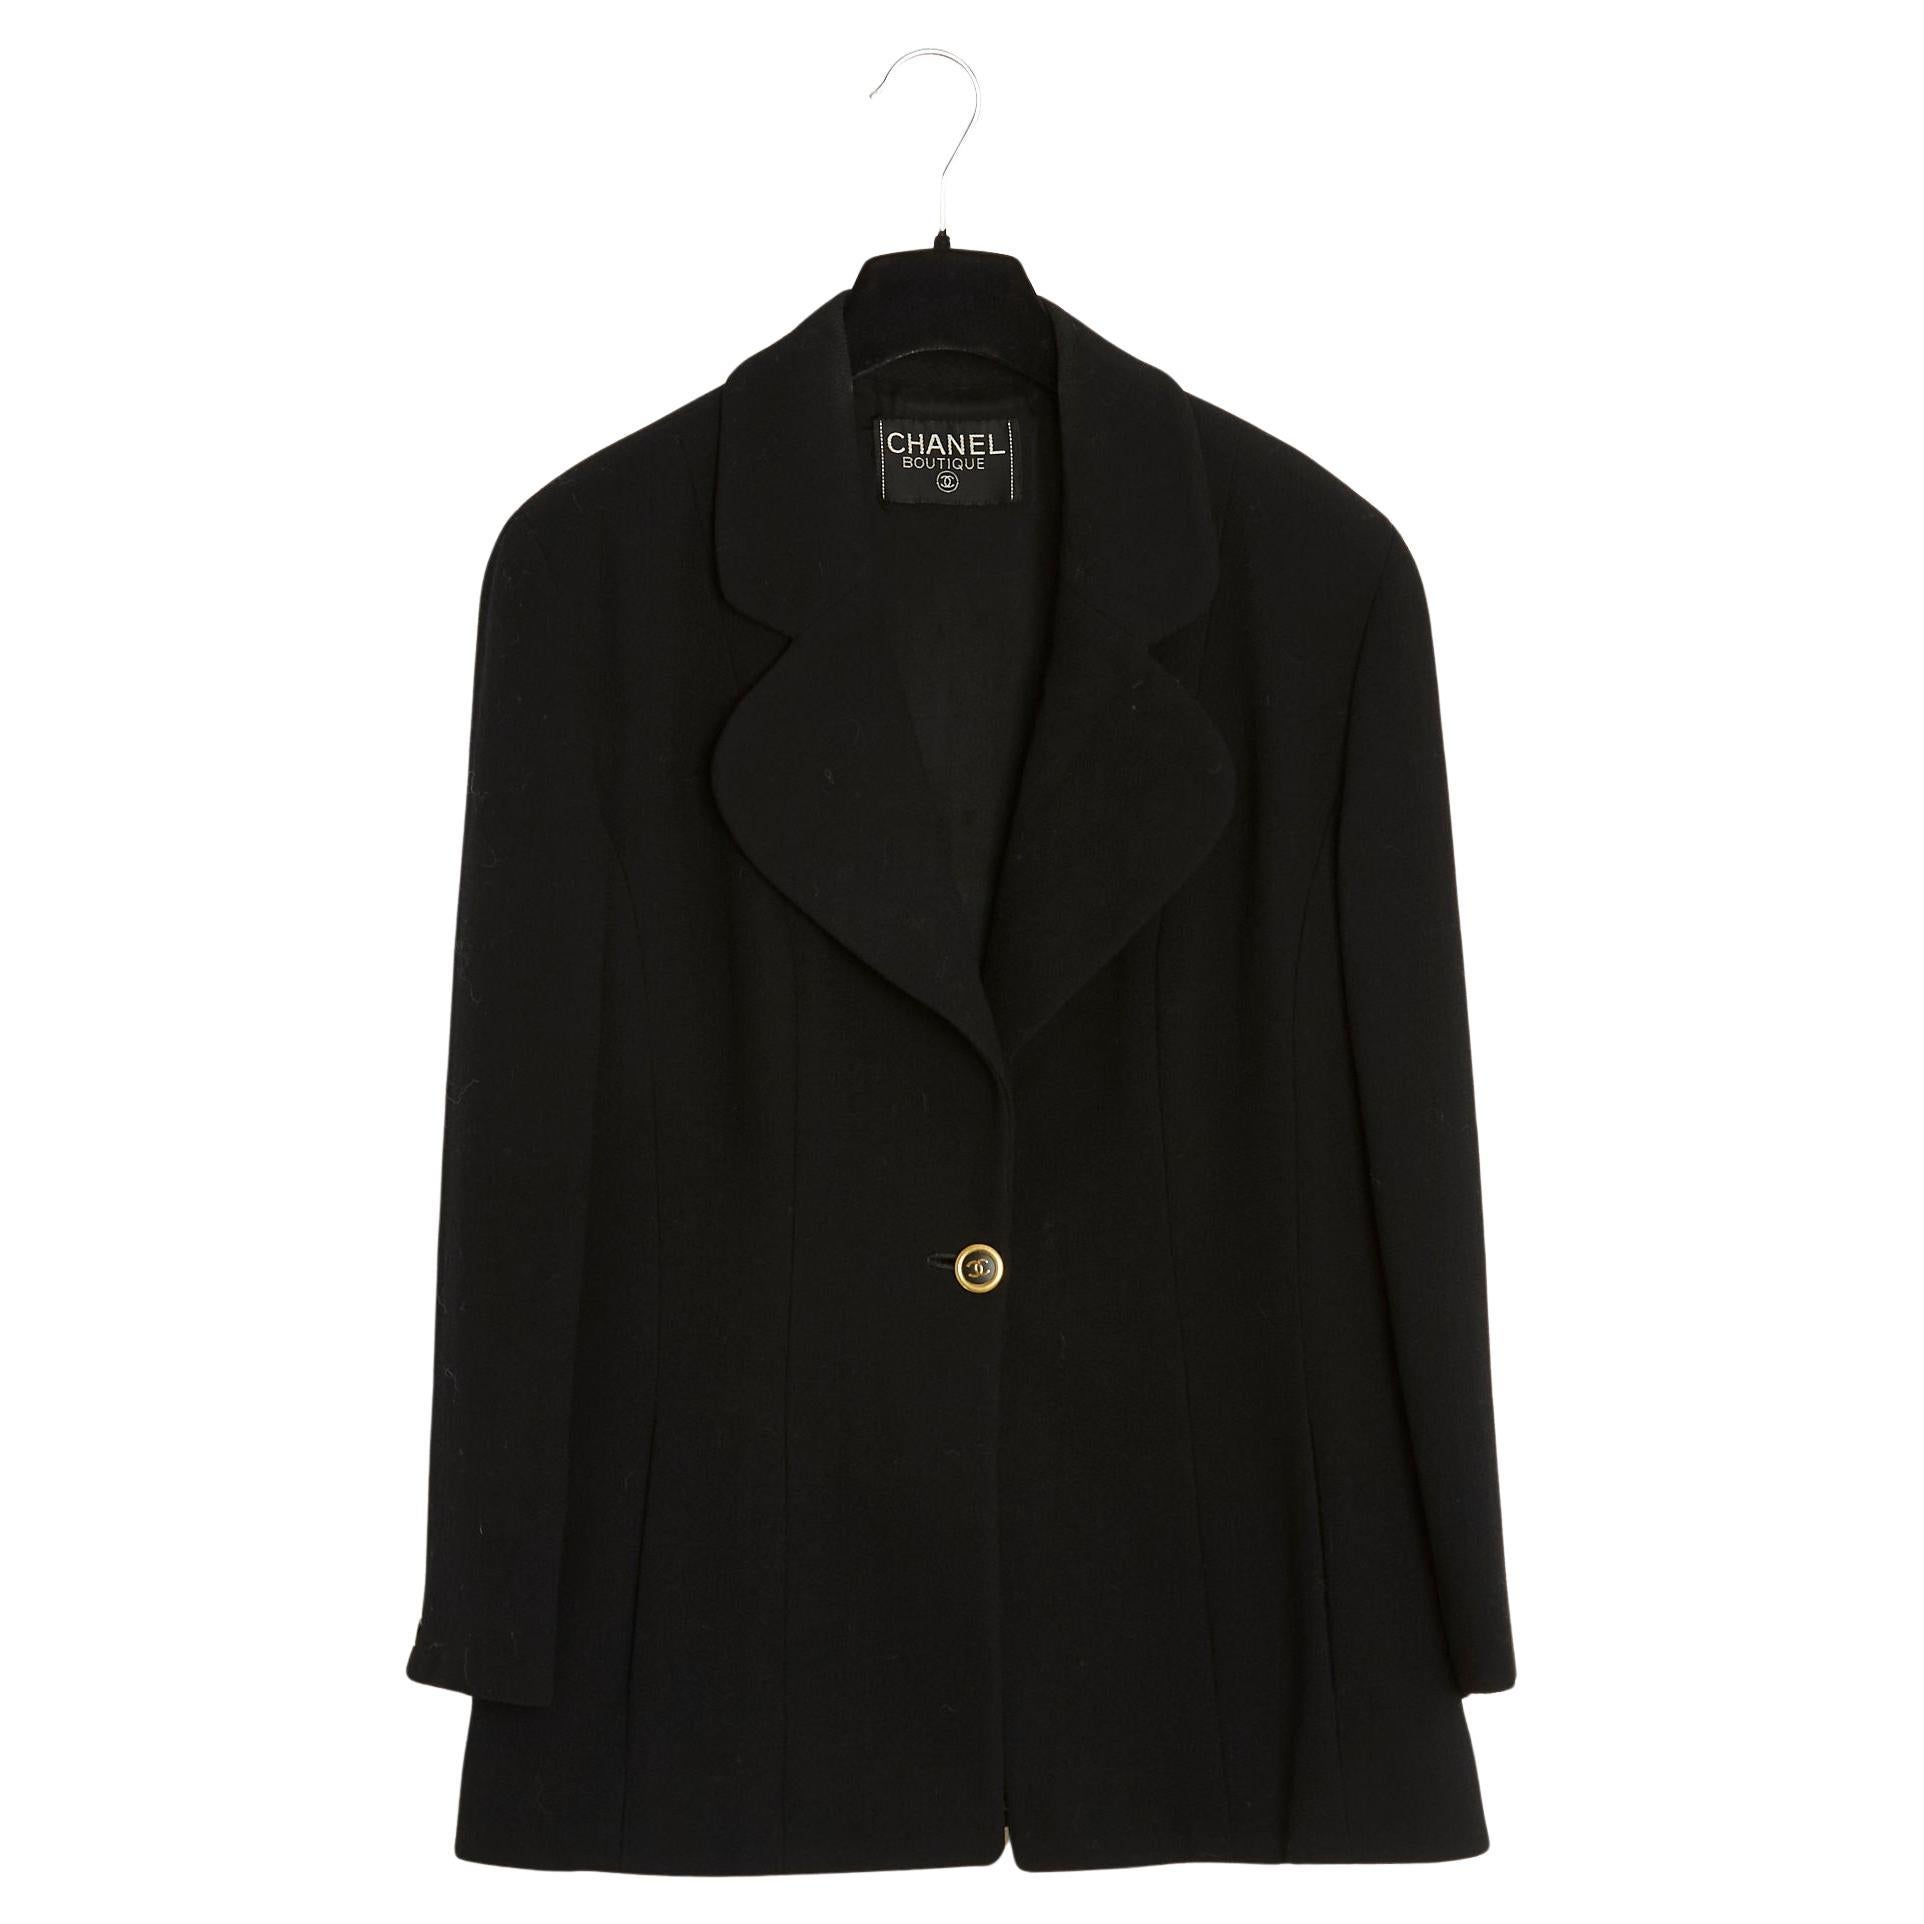 Late 80s Chanel black Wool Classic 'CC' Jacket Ensemble FR40 US10 For Sale